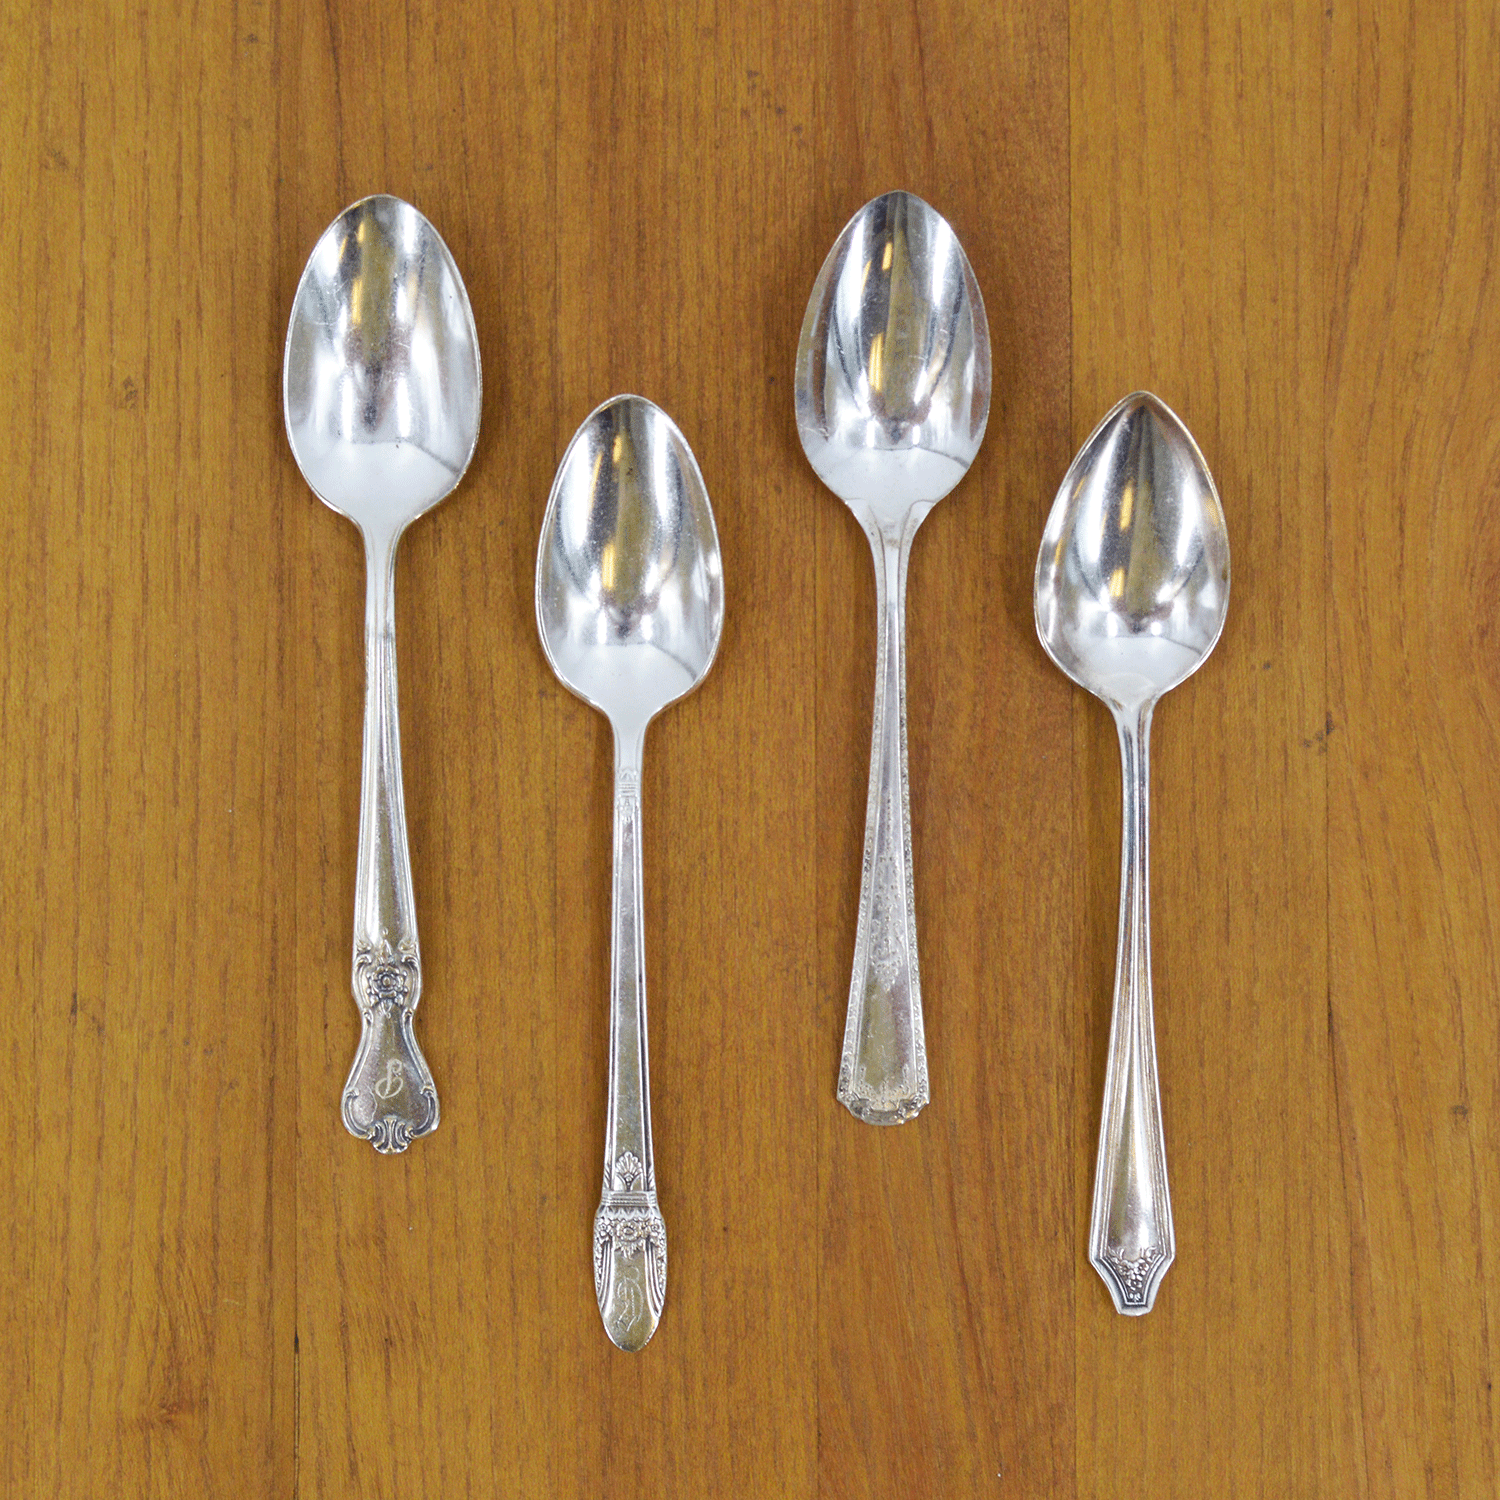 An elegant tea setting with an empty teacup and saucer, a Hester &amp; Cook Vintage Silver-Plate Tea Spoon Set of Four, and a bouquet of fresh flowers on a marble surface.